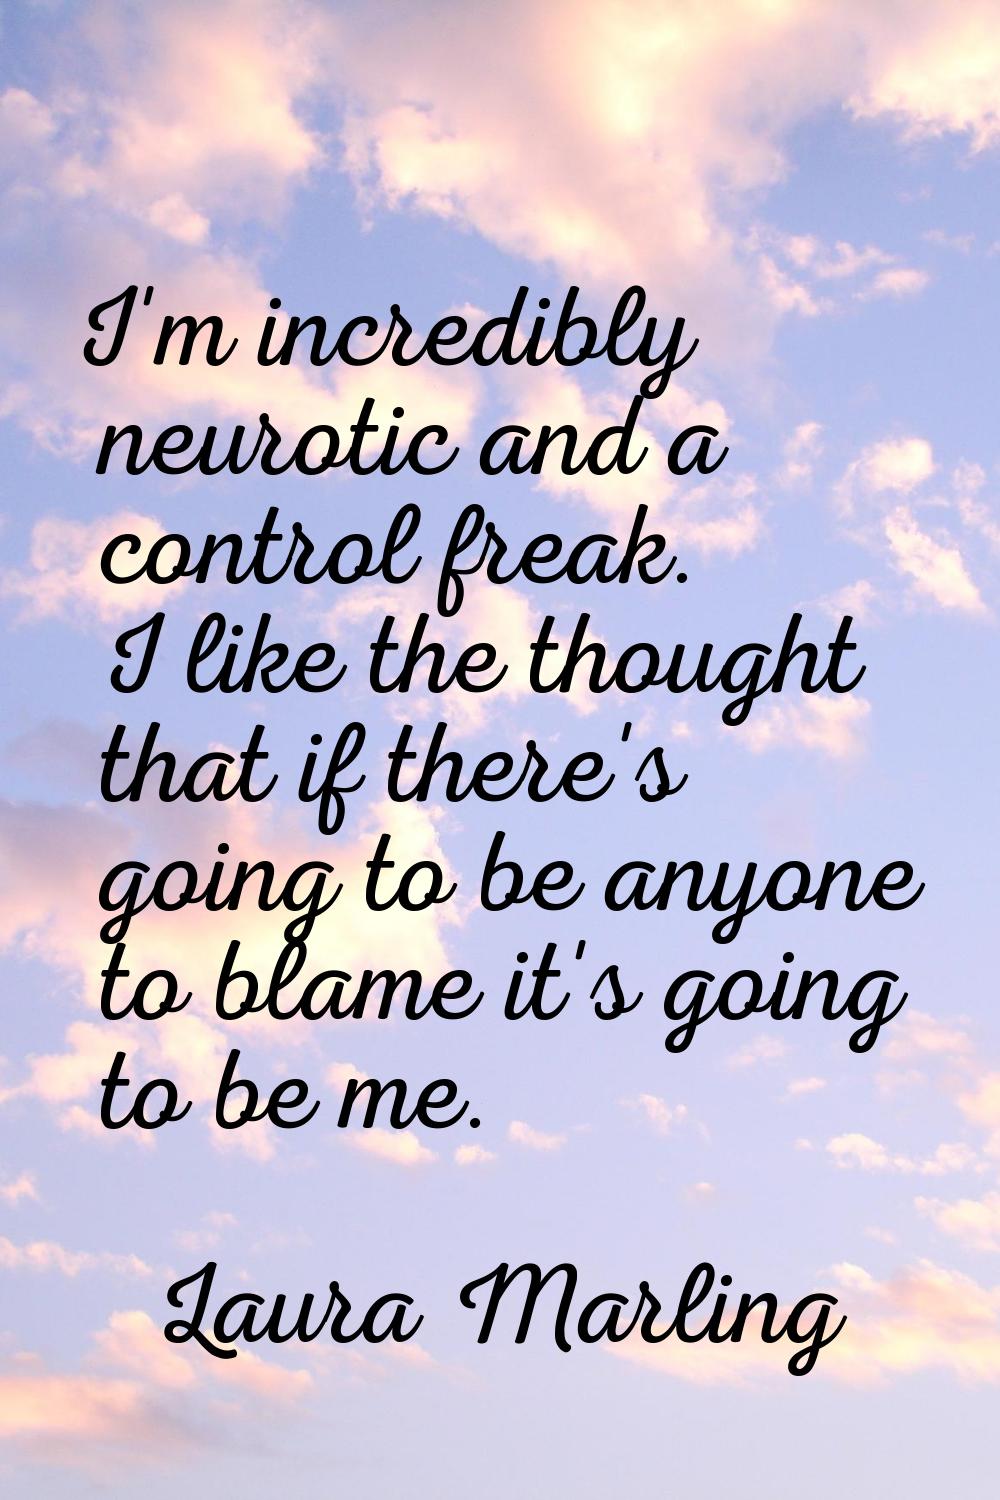 I'm incredibly neurotic and a control freak. I like the thought that if there's going to be anyone 